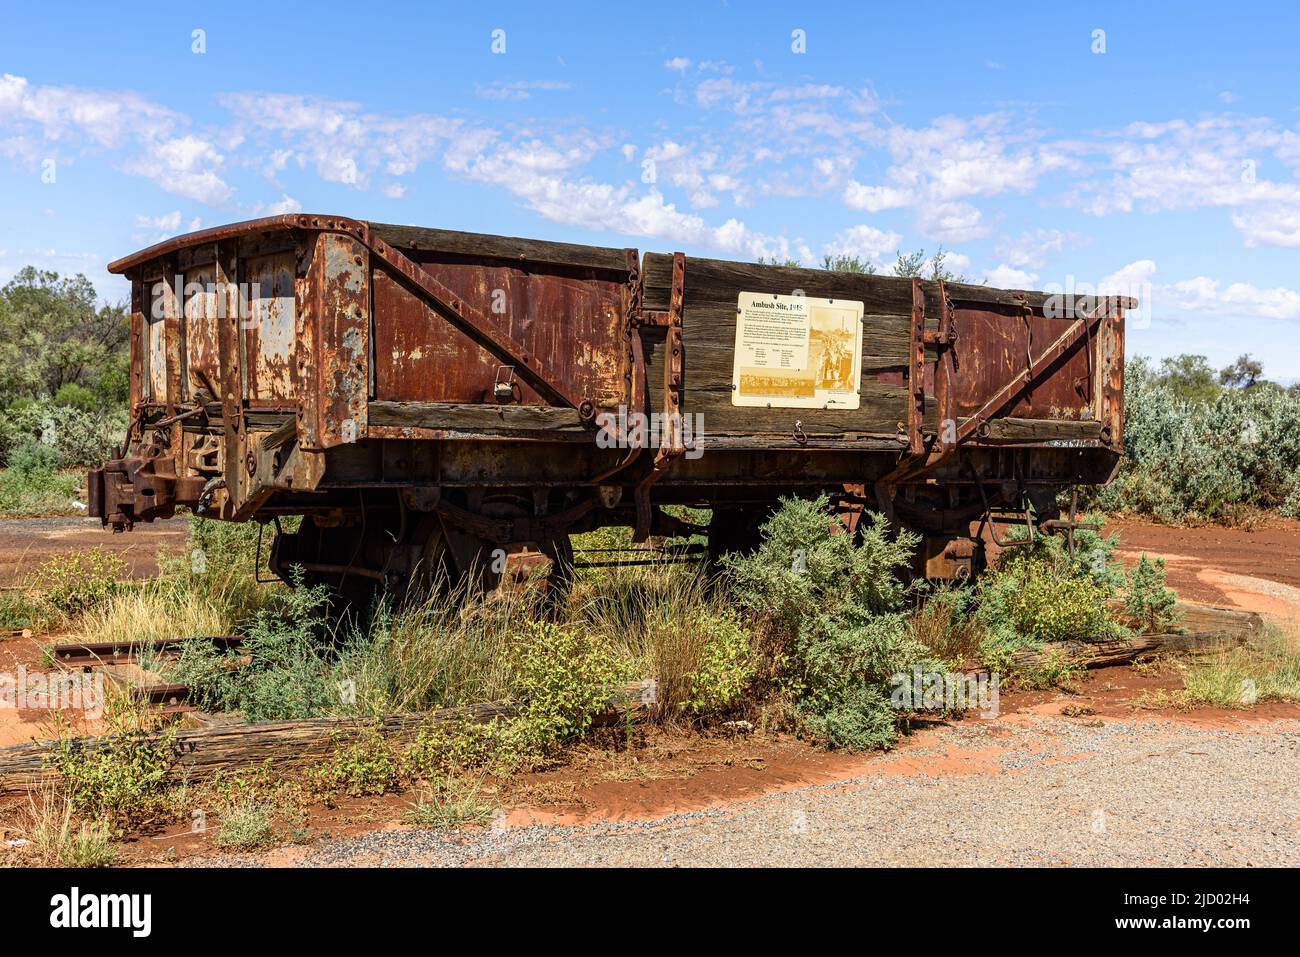 A railway carriage from the Picnic Train Attack Historical Site located in Broken Hill, New South Wales Stock Photo